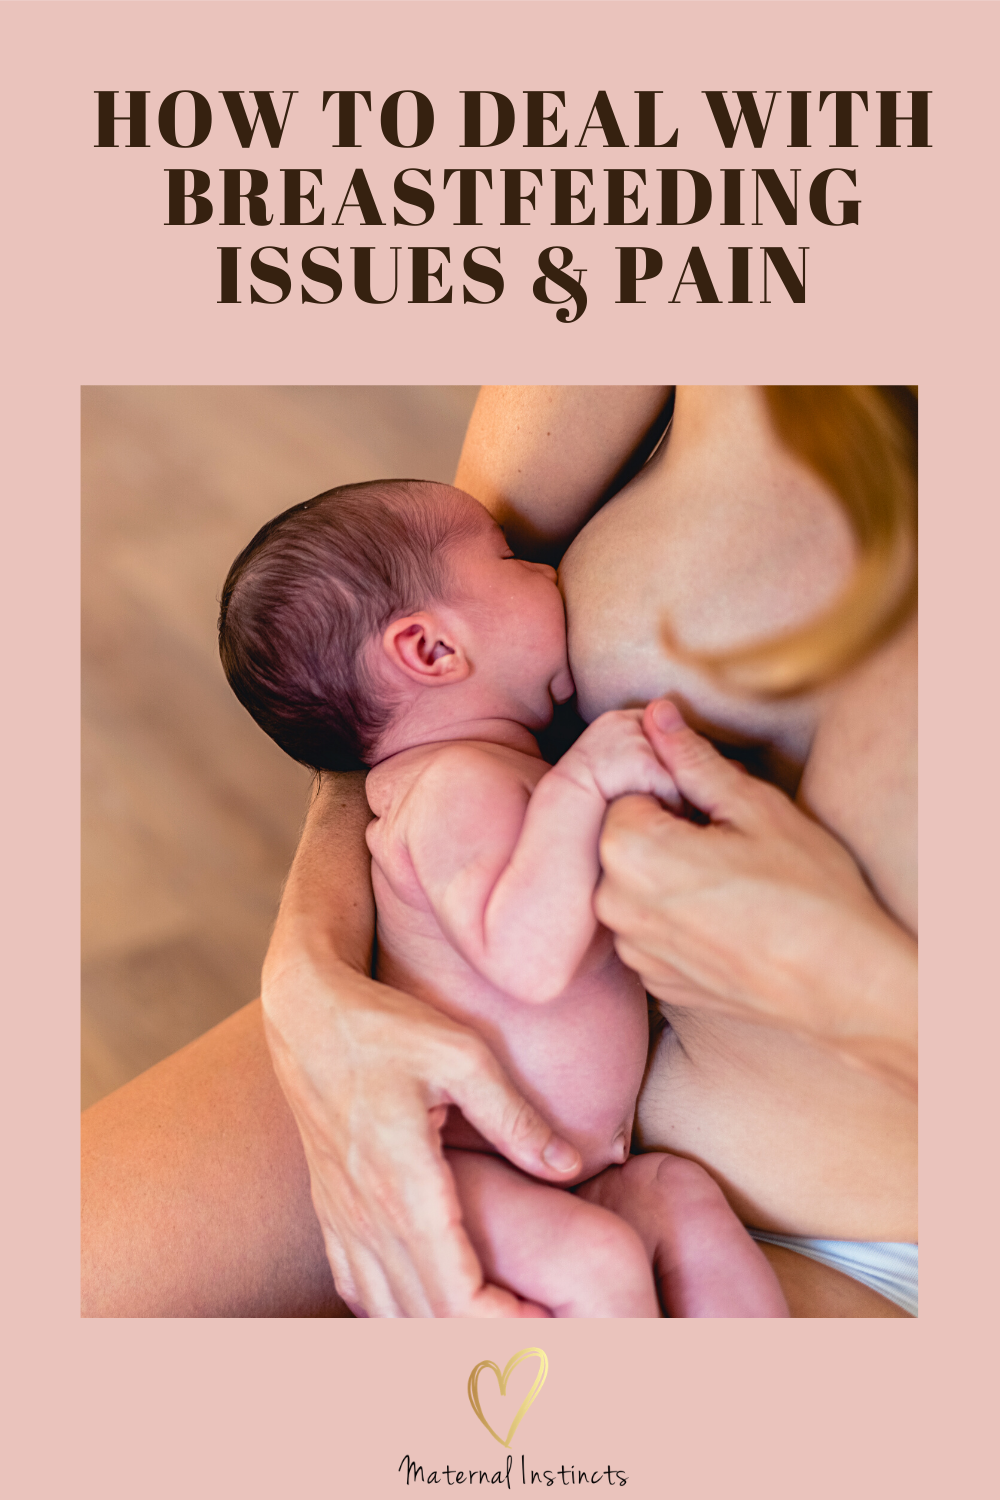 How to Deal With Breastfeeding Issues & Pain